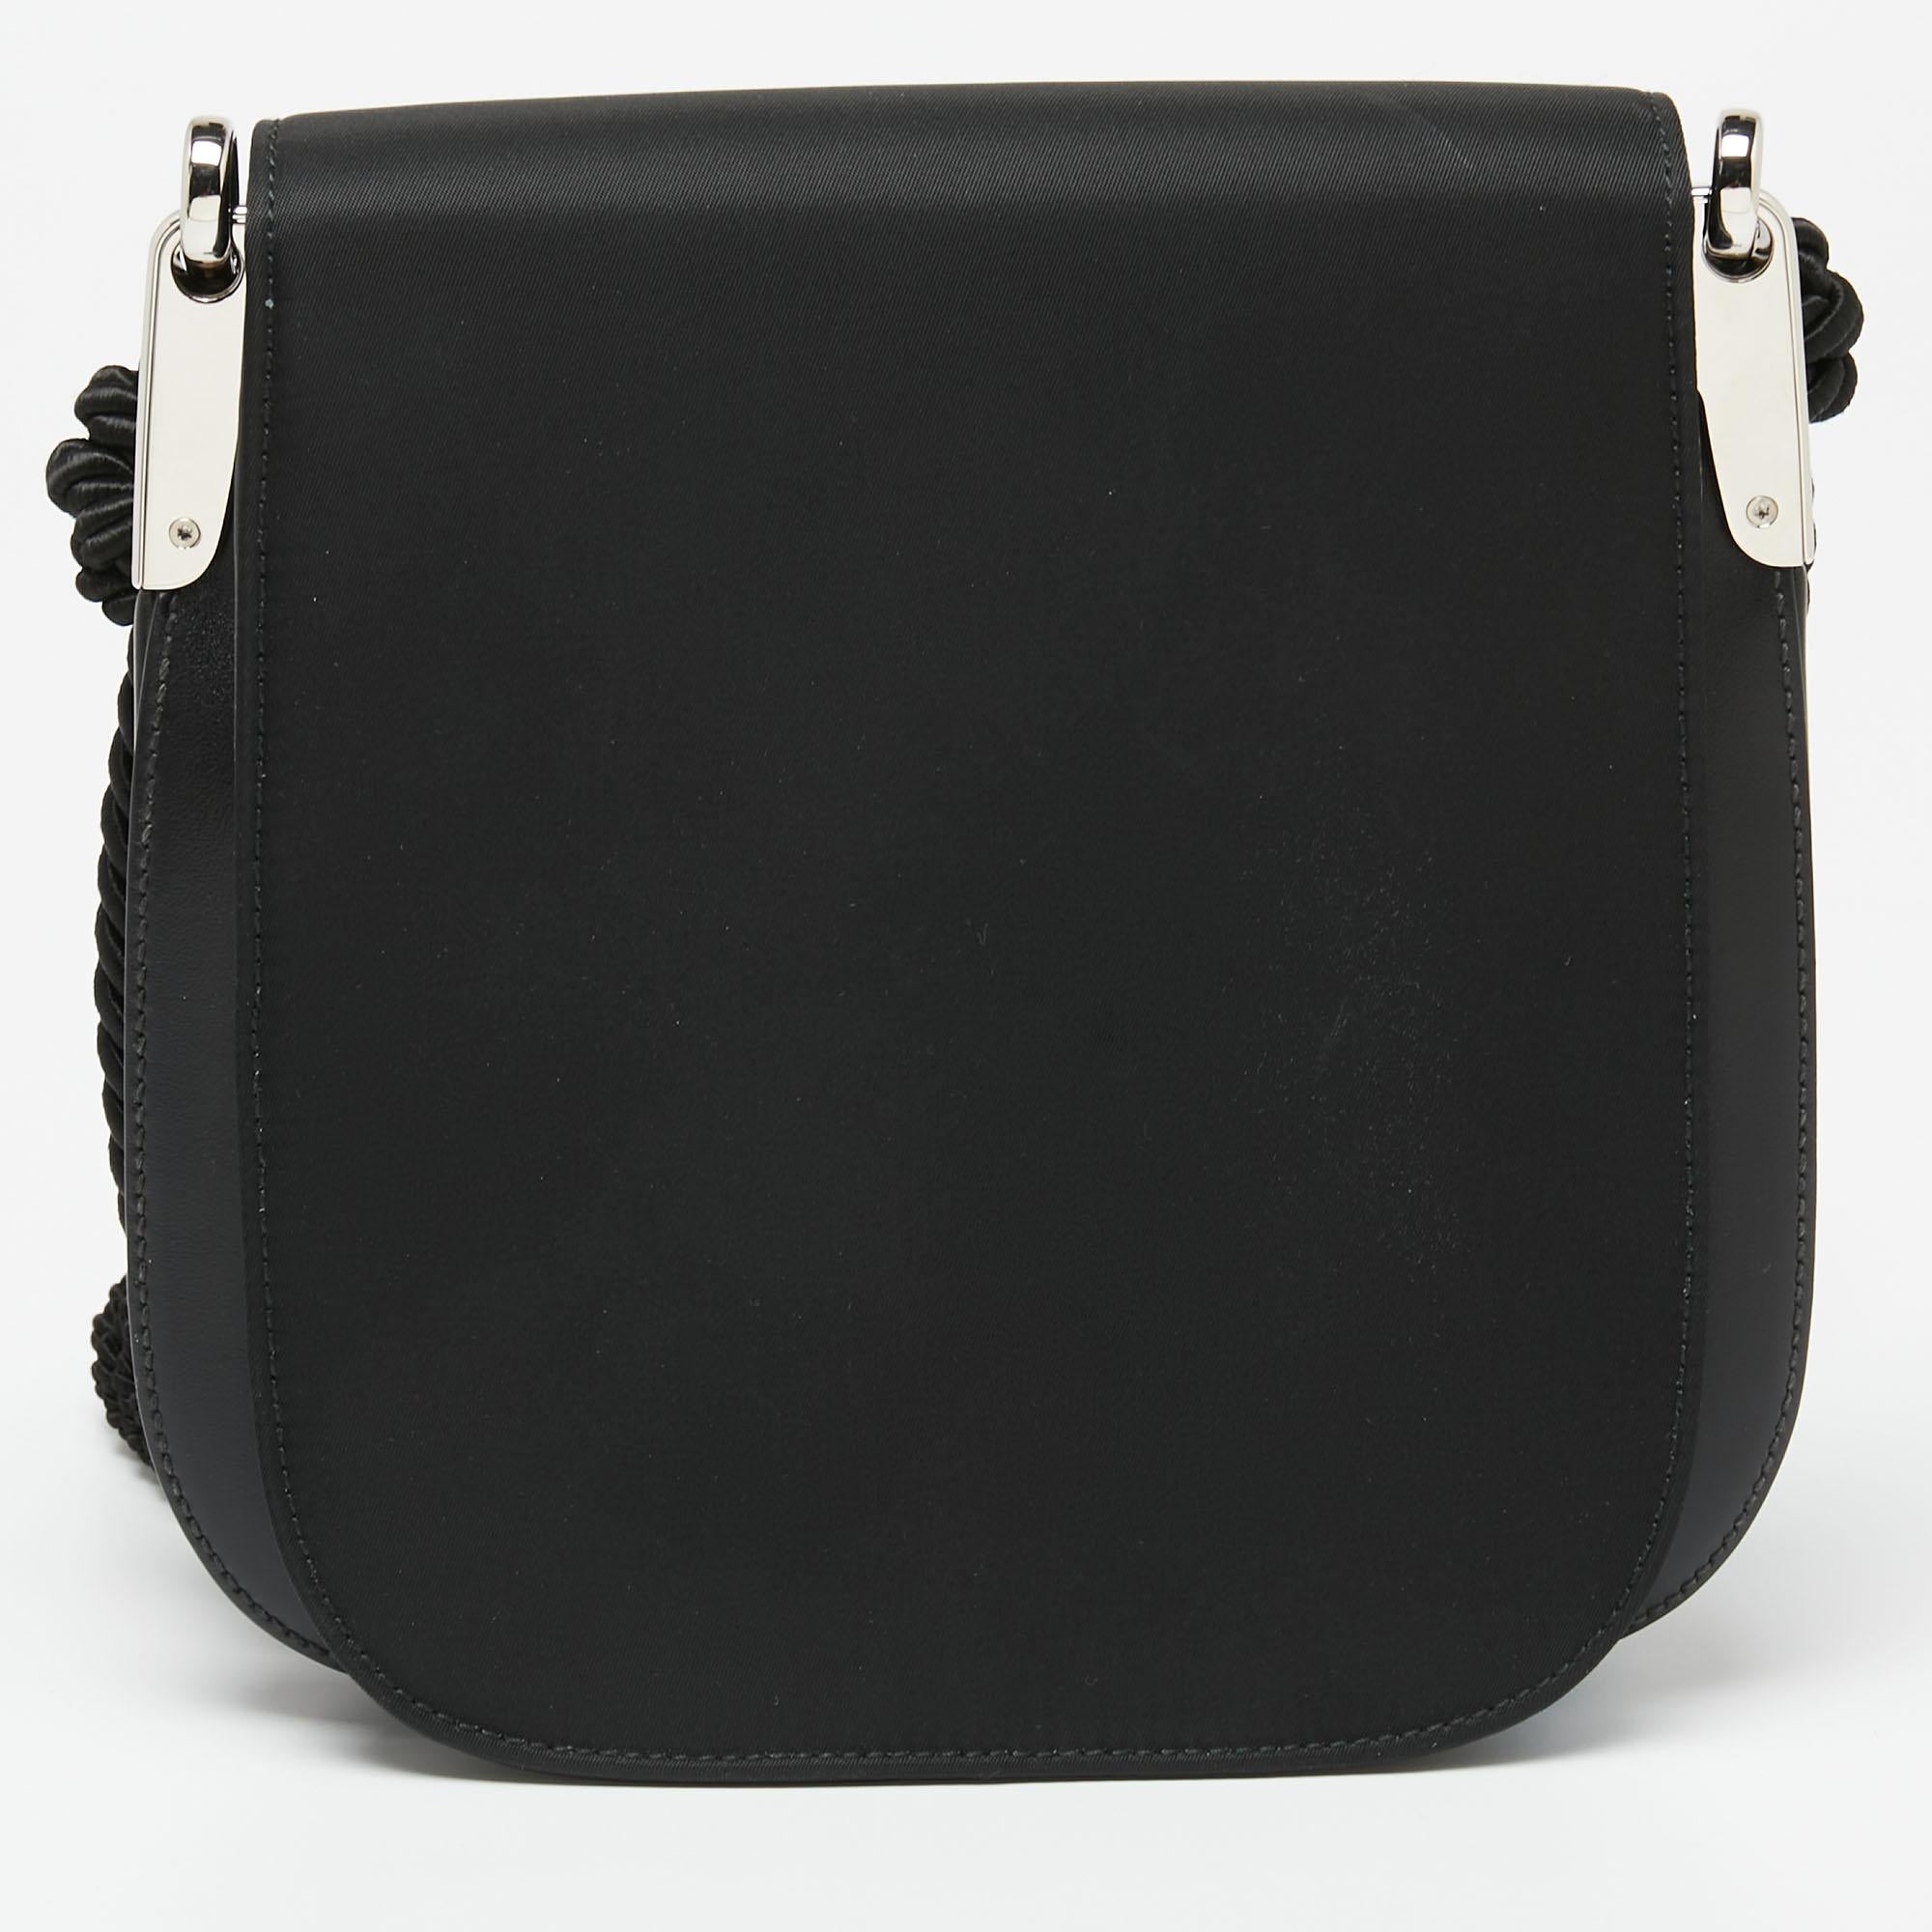 A shoulder bag from Prada is just what you need in your closet. This black bag here comes crafted from fine materials and has a beautiful tassel detail on the front and on the strap. It will effortlessly match all your casual outfits.

Includes: